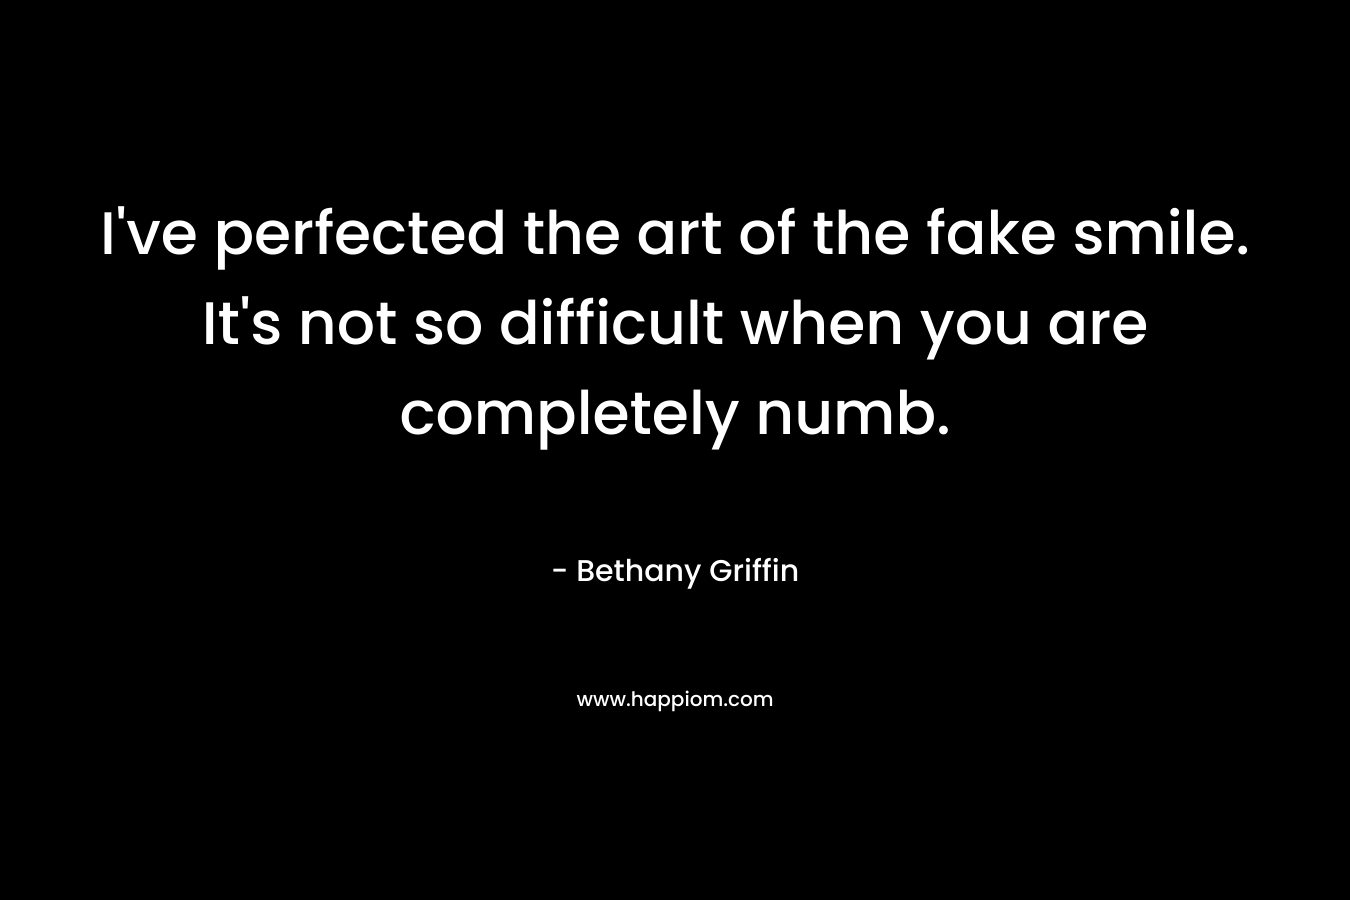 I’ve perfected the art of the fake smile. It’s not so difficult when you are completely numb. – Bethany Griffin